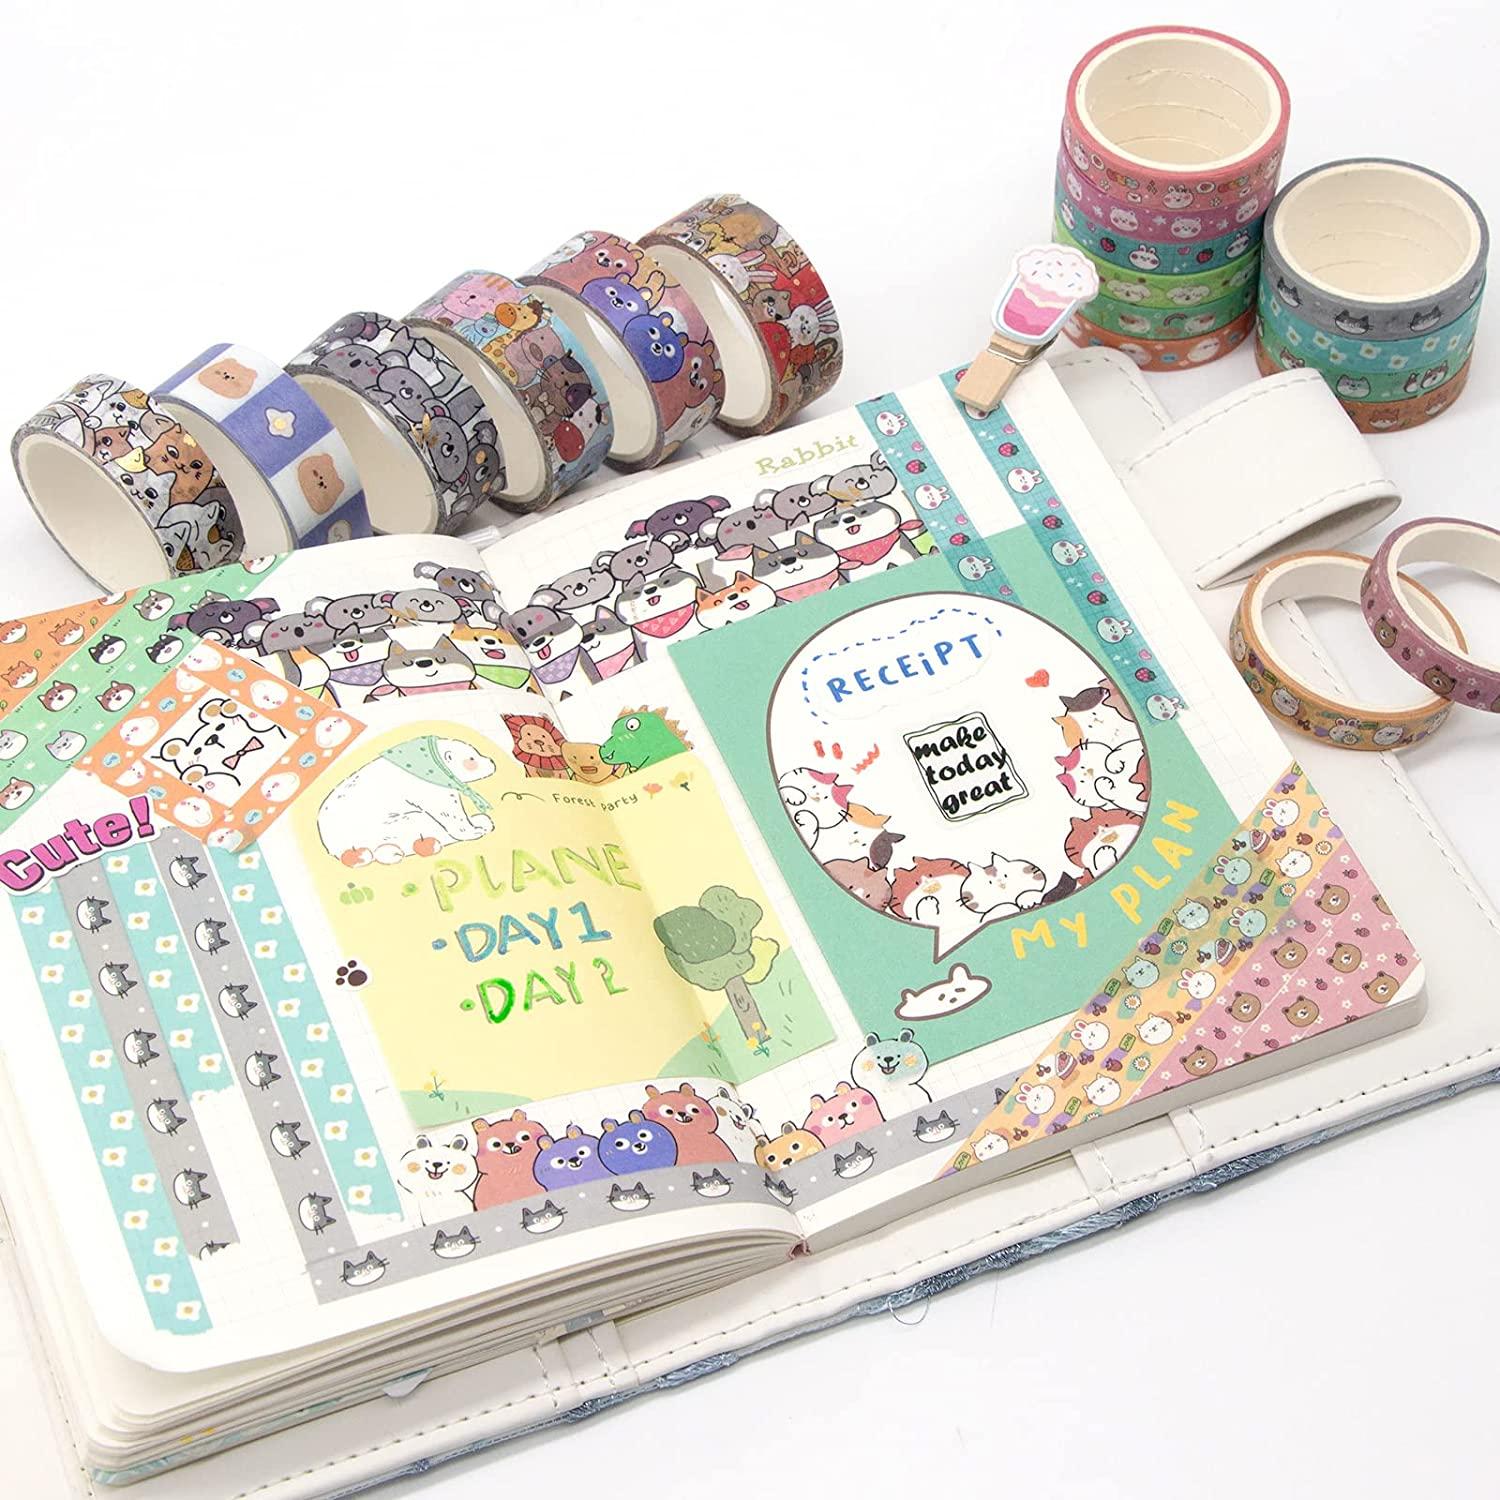  Happy Birthday Theme Washi Tape Set Great for Adults and Kids  (10 Rolls) / Decorative Masking Tape for Birthday Party, Gift Wrapping,  Scrapbook Photo Album, DIY Art & Crafts Projects, Journaling 